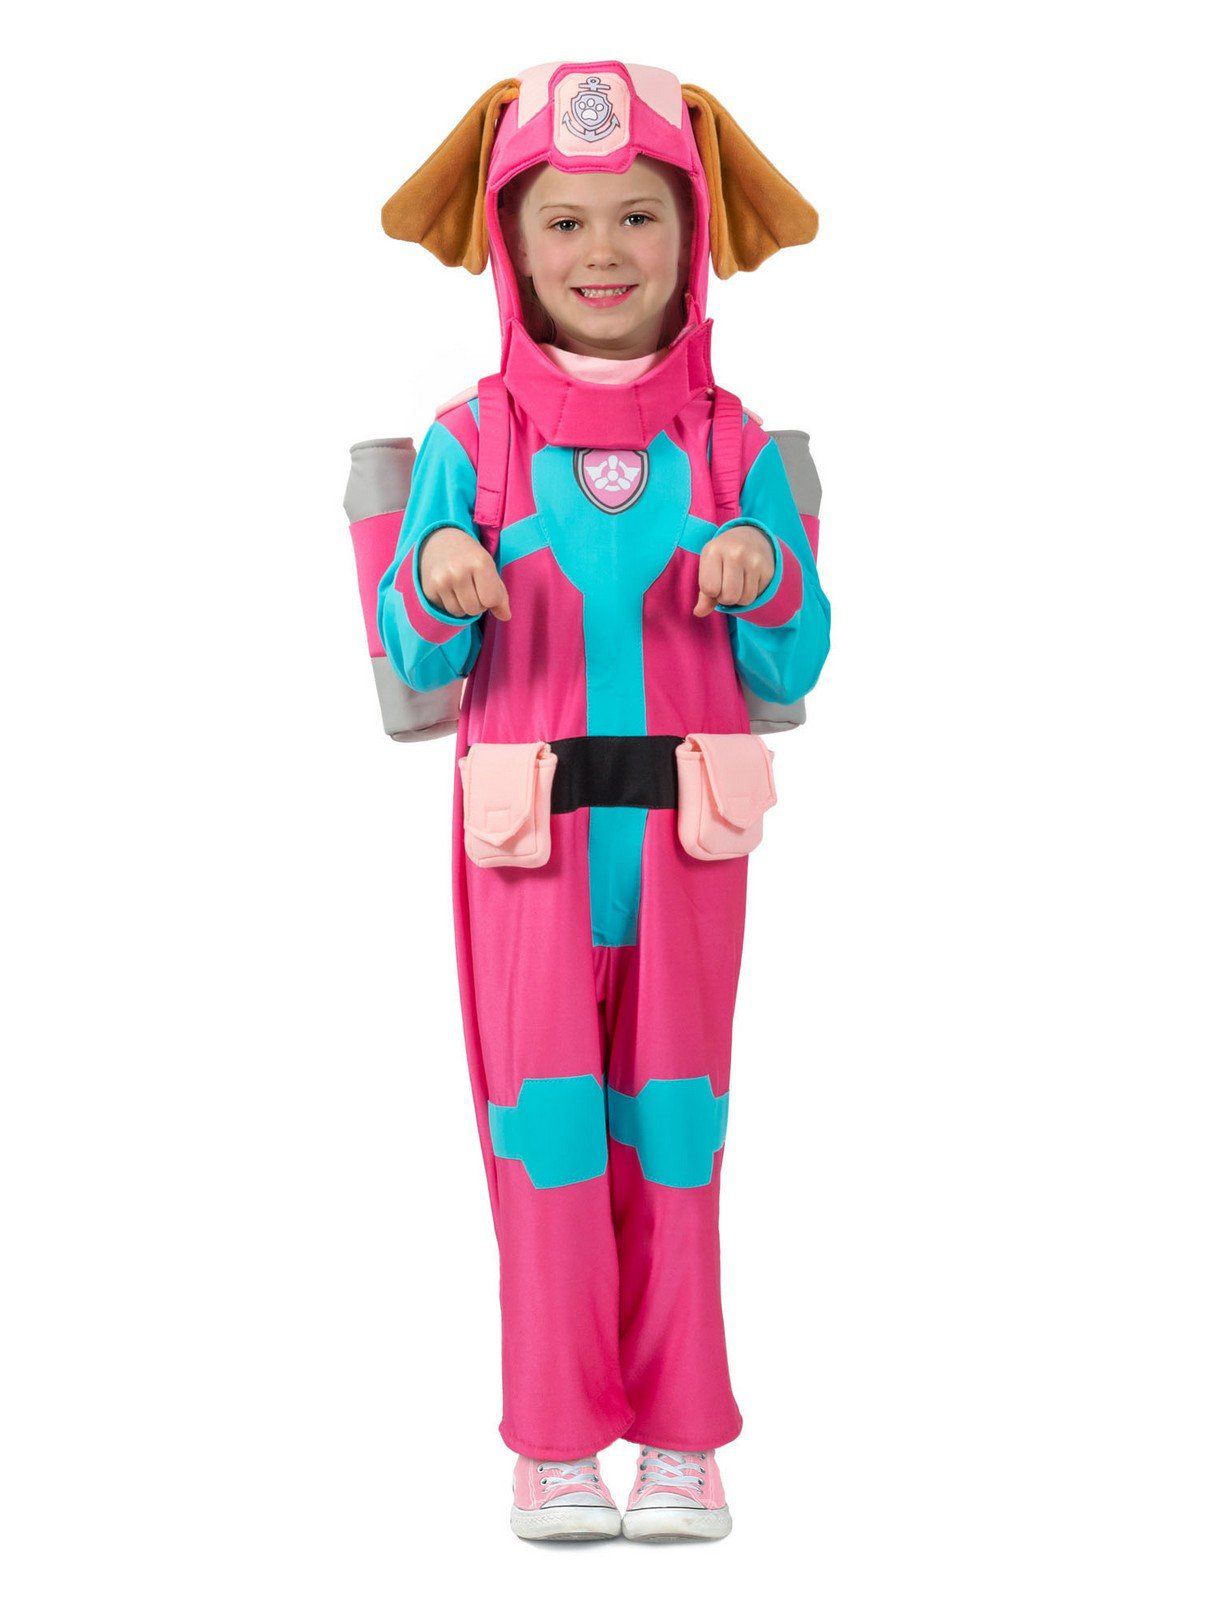 Girls' Paw Patrol Skye Jumpsuit, Headpiece and Backpack - costumes.com